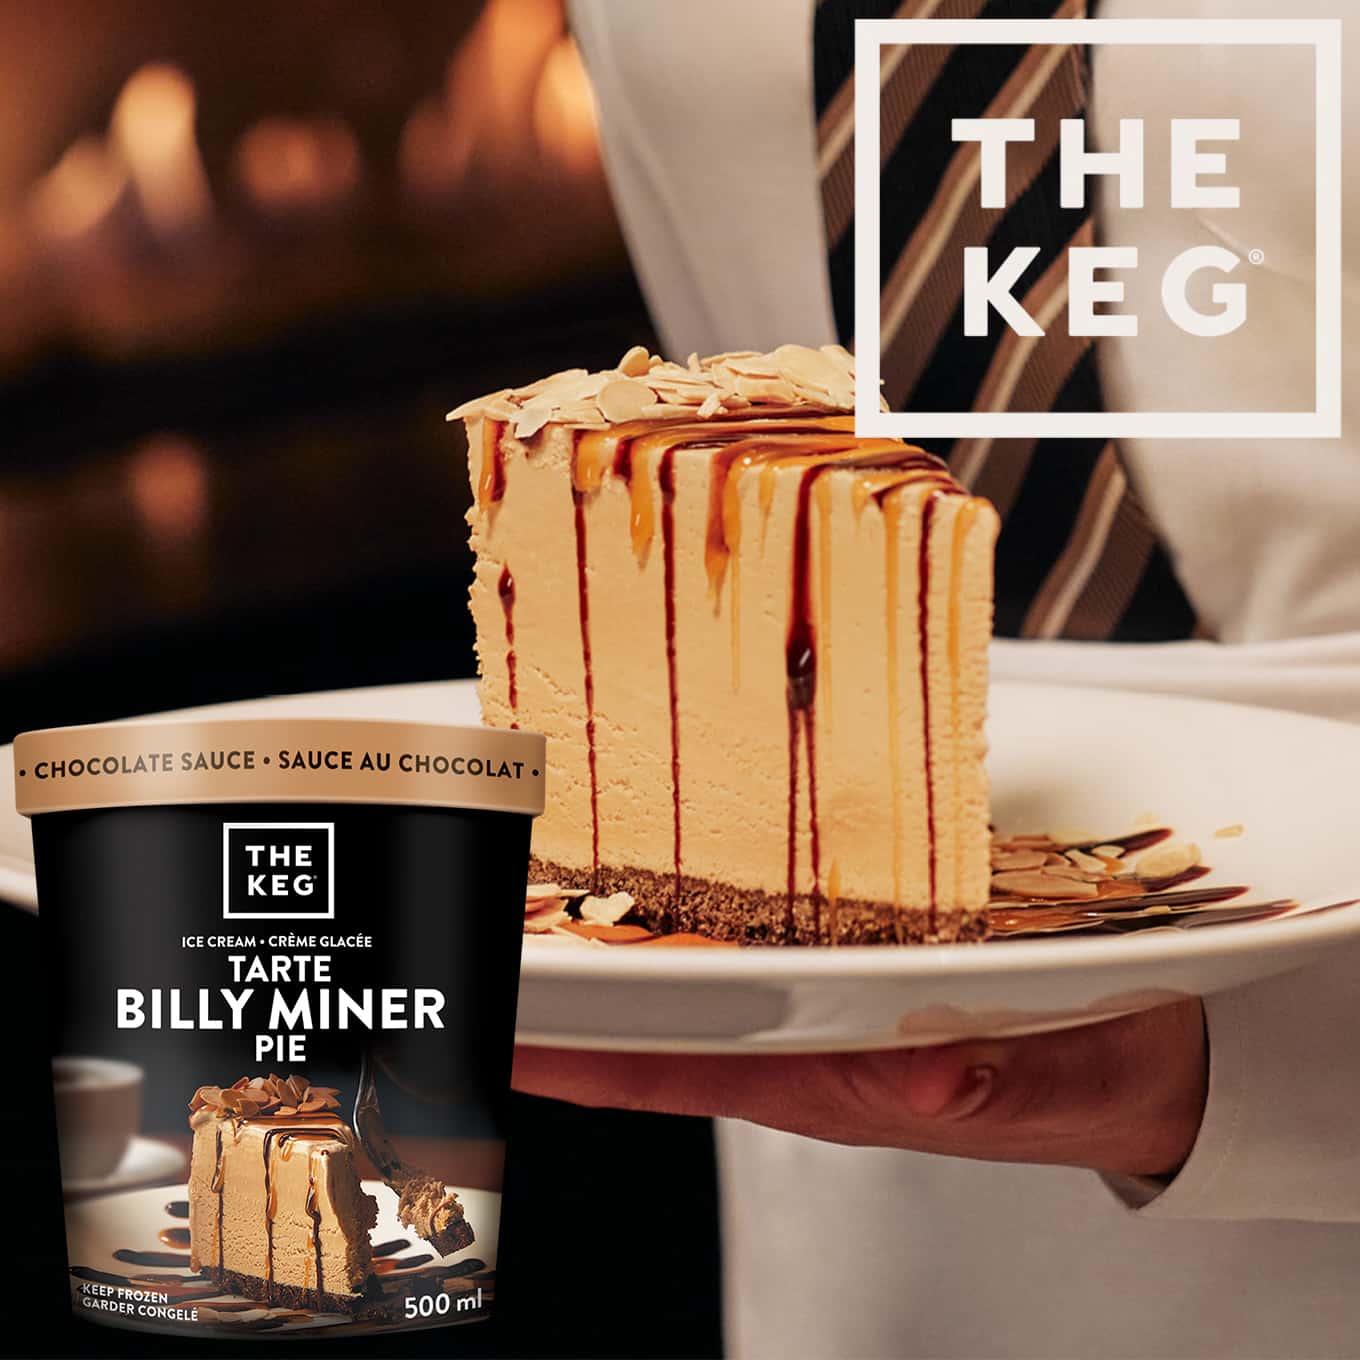 The keg billy miner pie ice cream pint creme brulee raspberry cheesecake from the the keg wholesaler transcold distribution